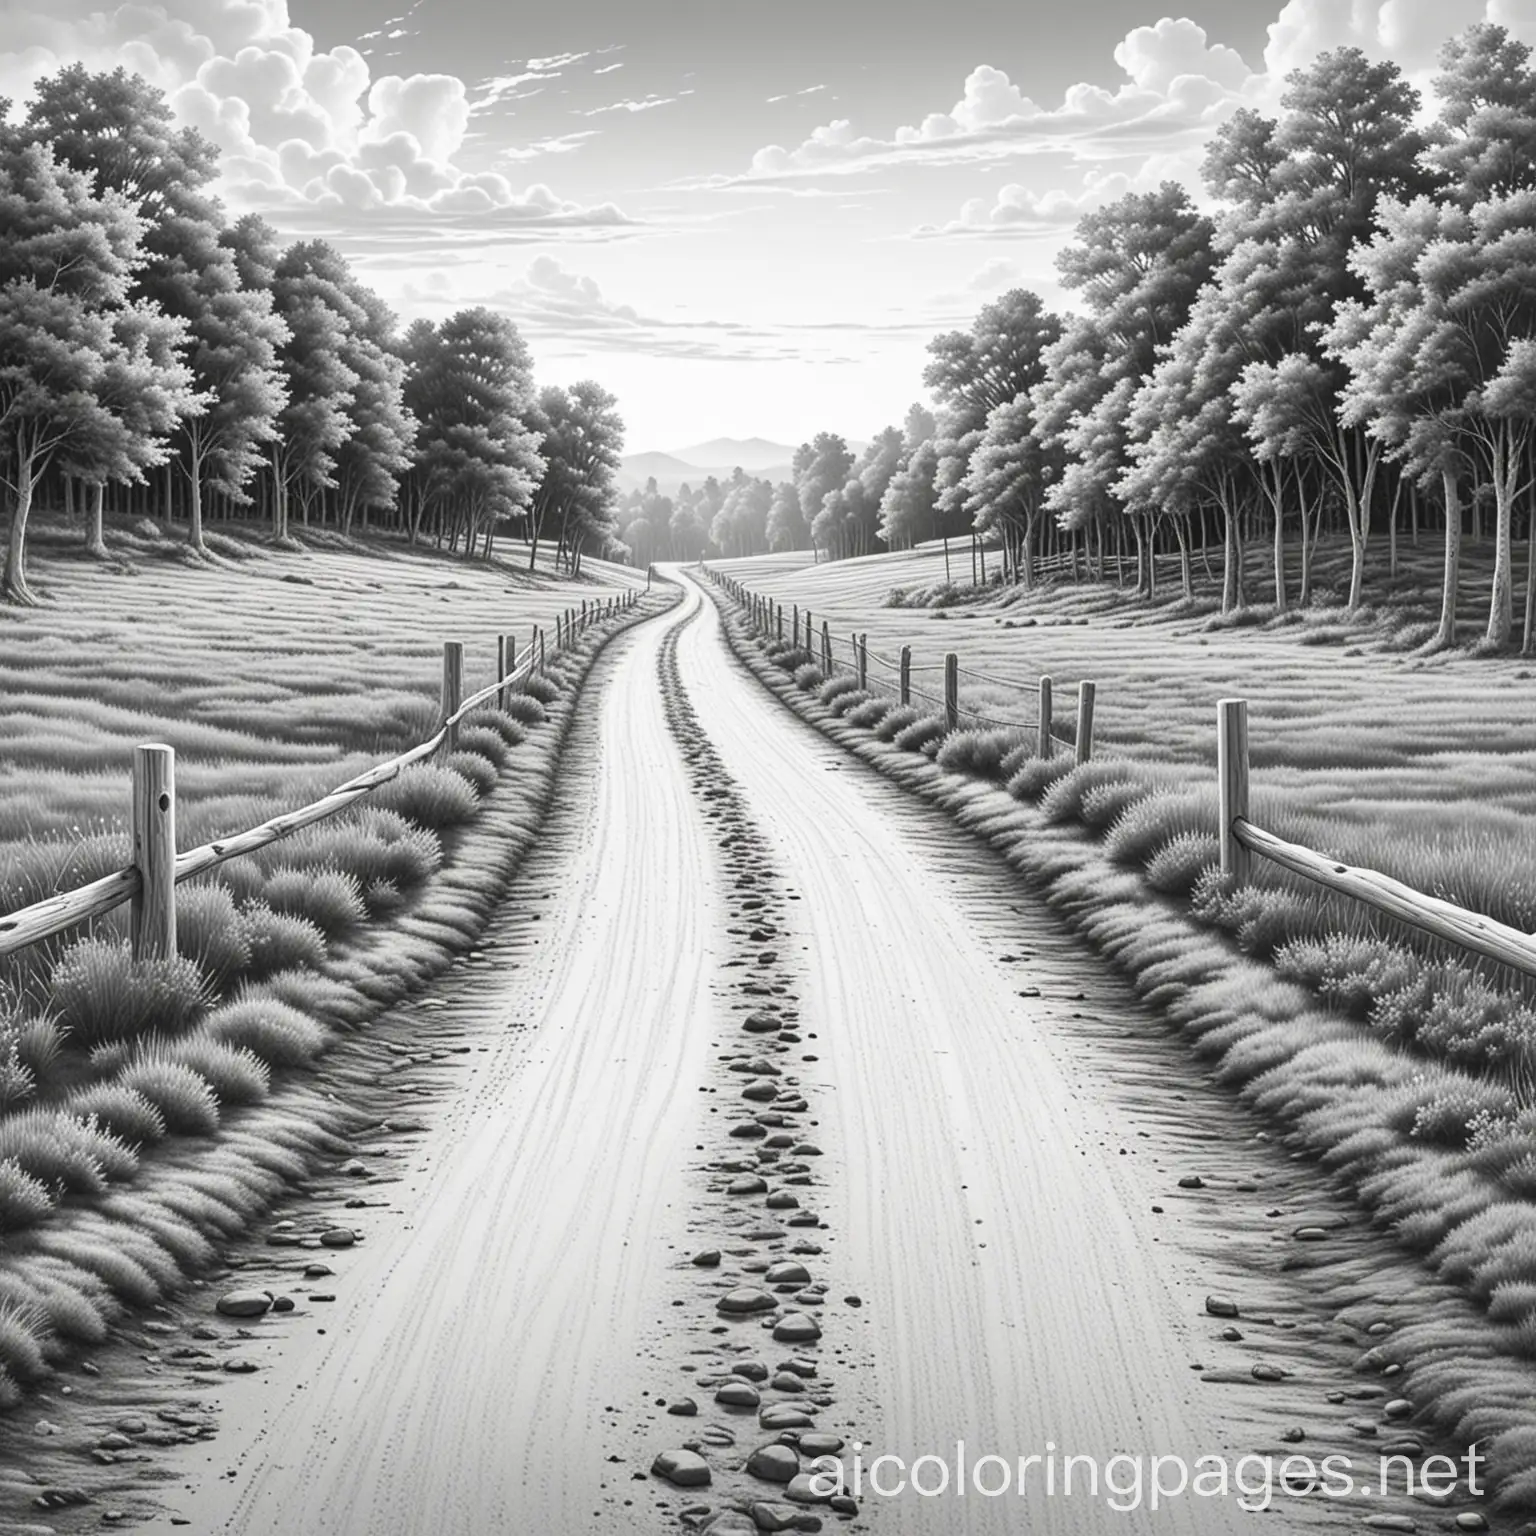 Grayscale country dirt road, Coloring Page, black and white, line art, white background, Simplicity, Ample White Space. The background of the coloring page is plain white to make it easy for young children to color within the lines. The outlines of all the subjects are easy to distinguish, making it simple for kids to color without too much difficulty